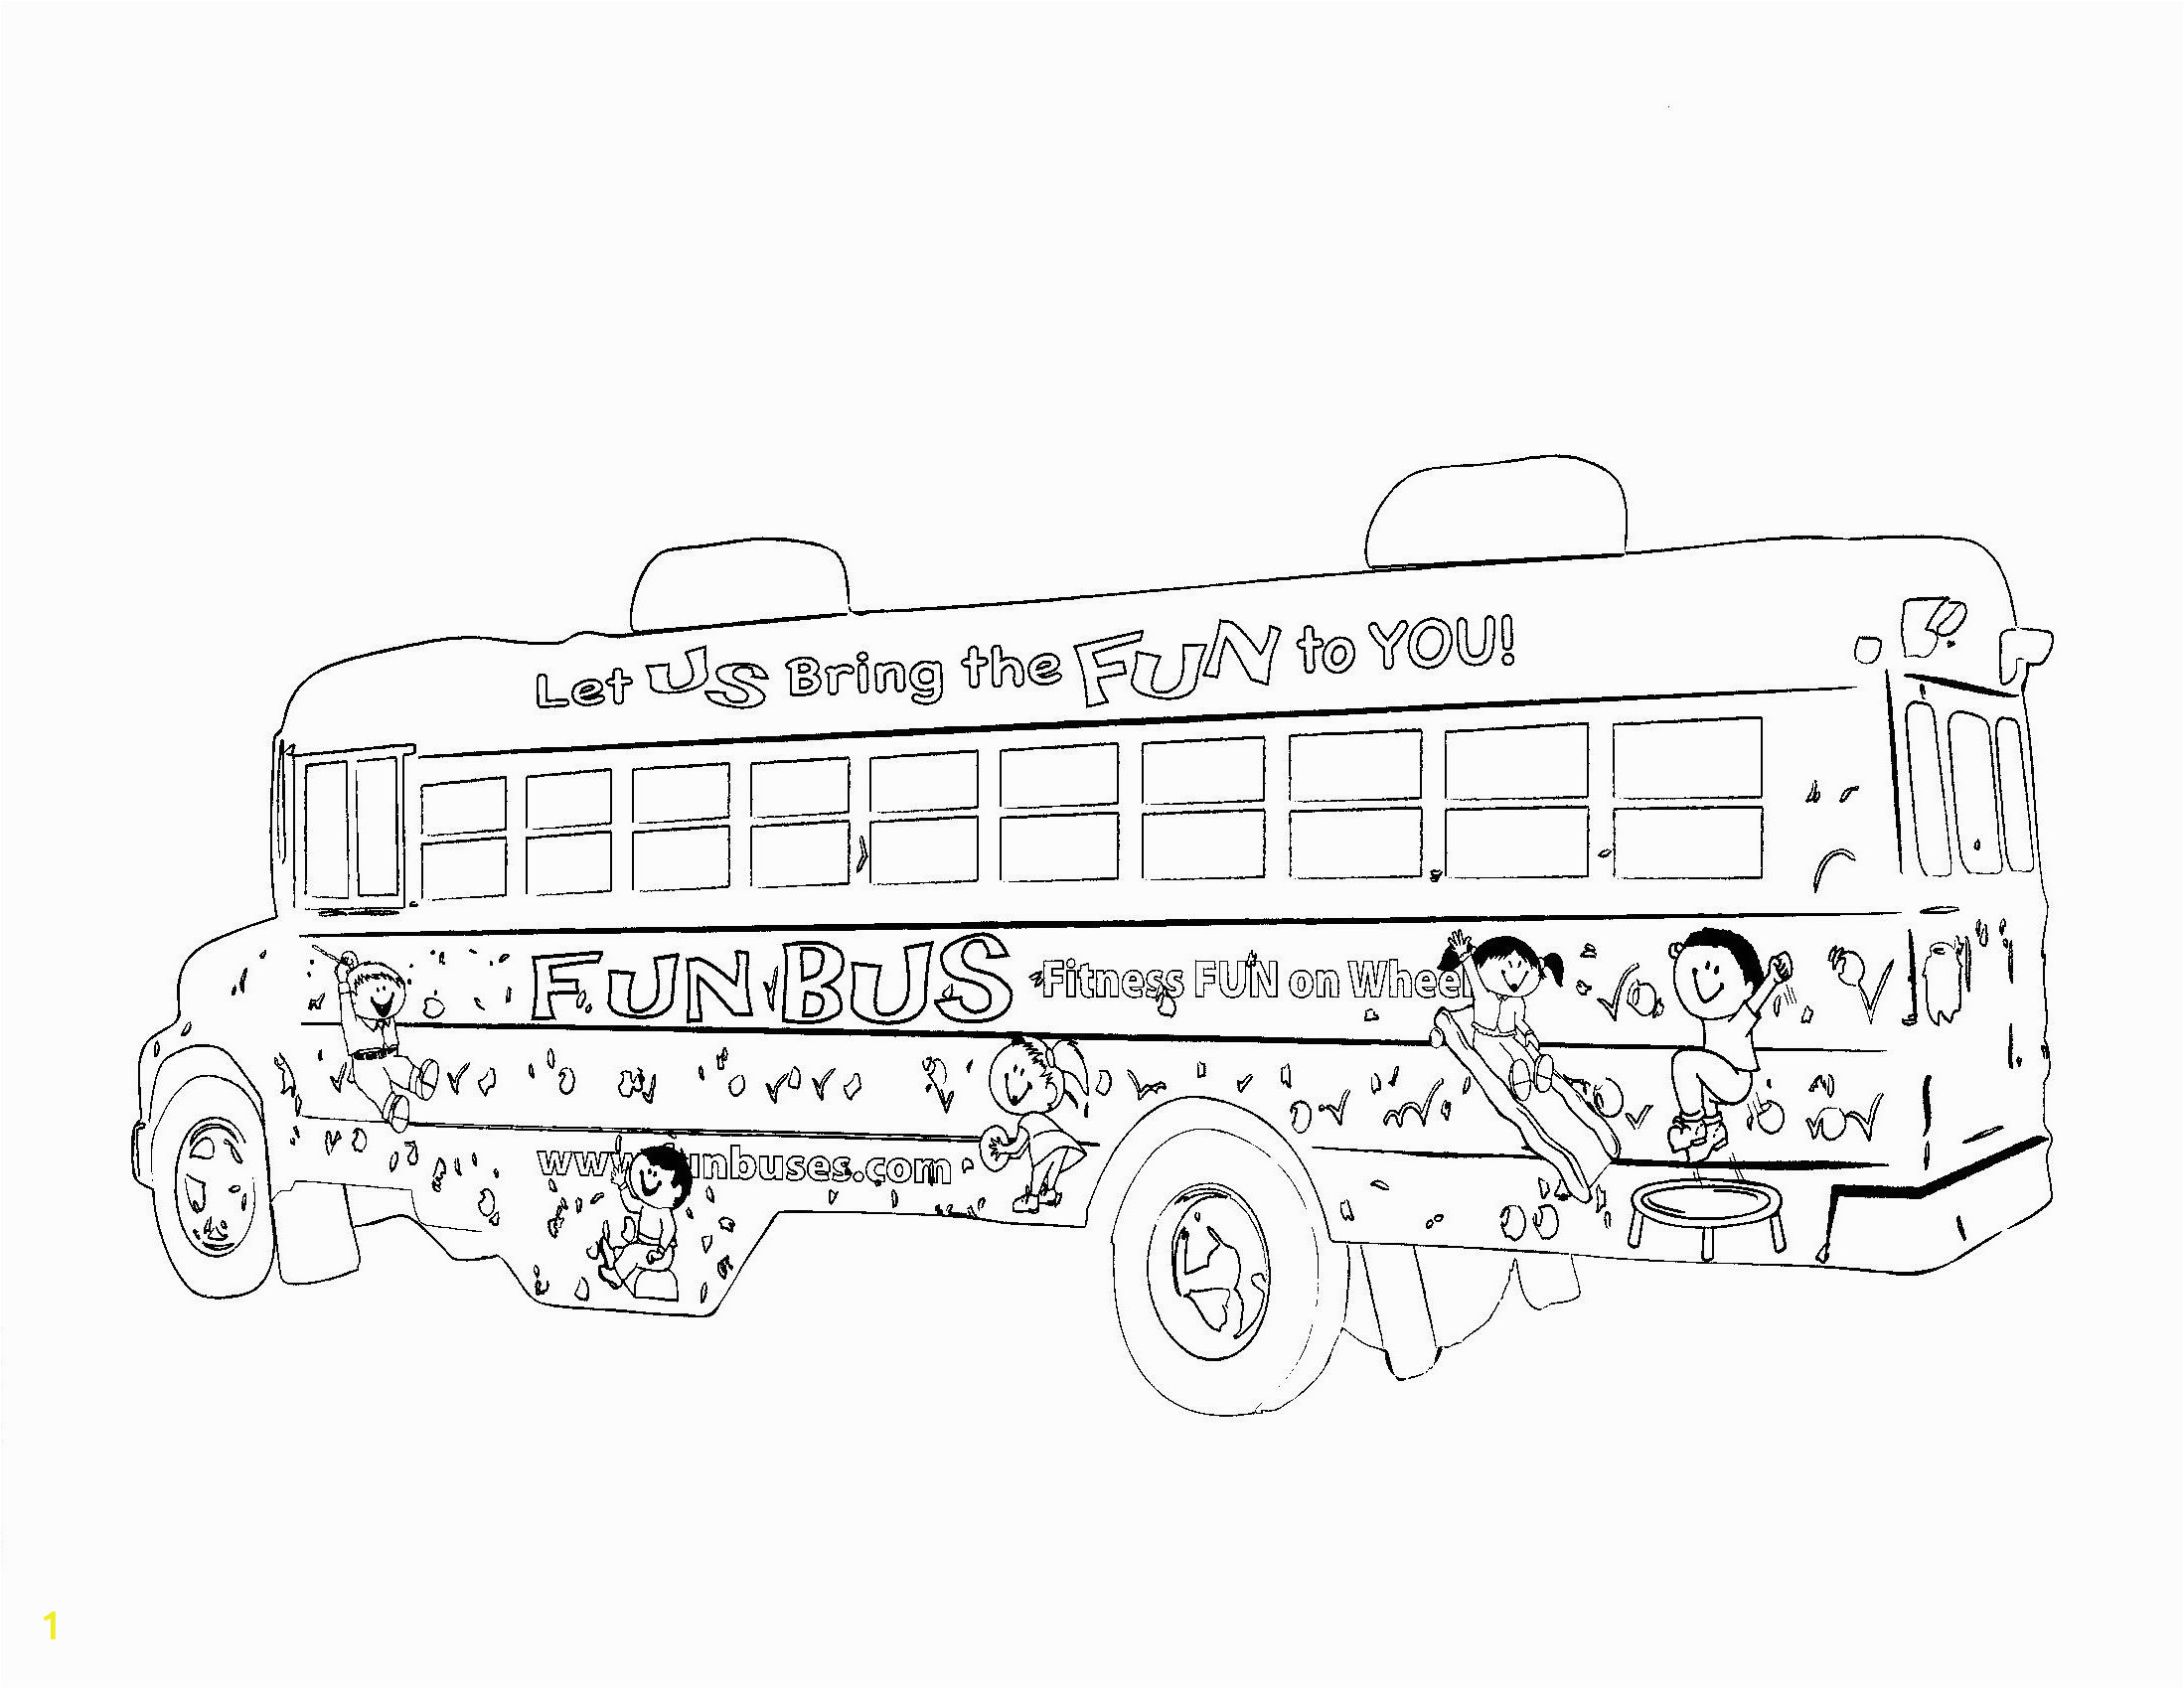 Free Printable School Bus Coloring Pages Free Printable School Bus Coloring Pages for Kids